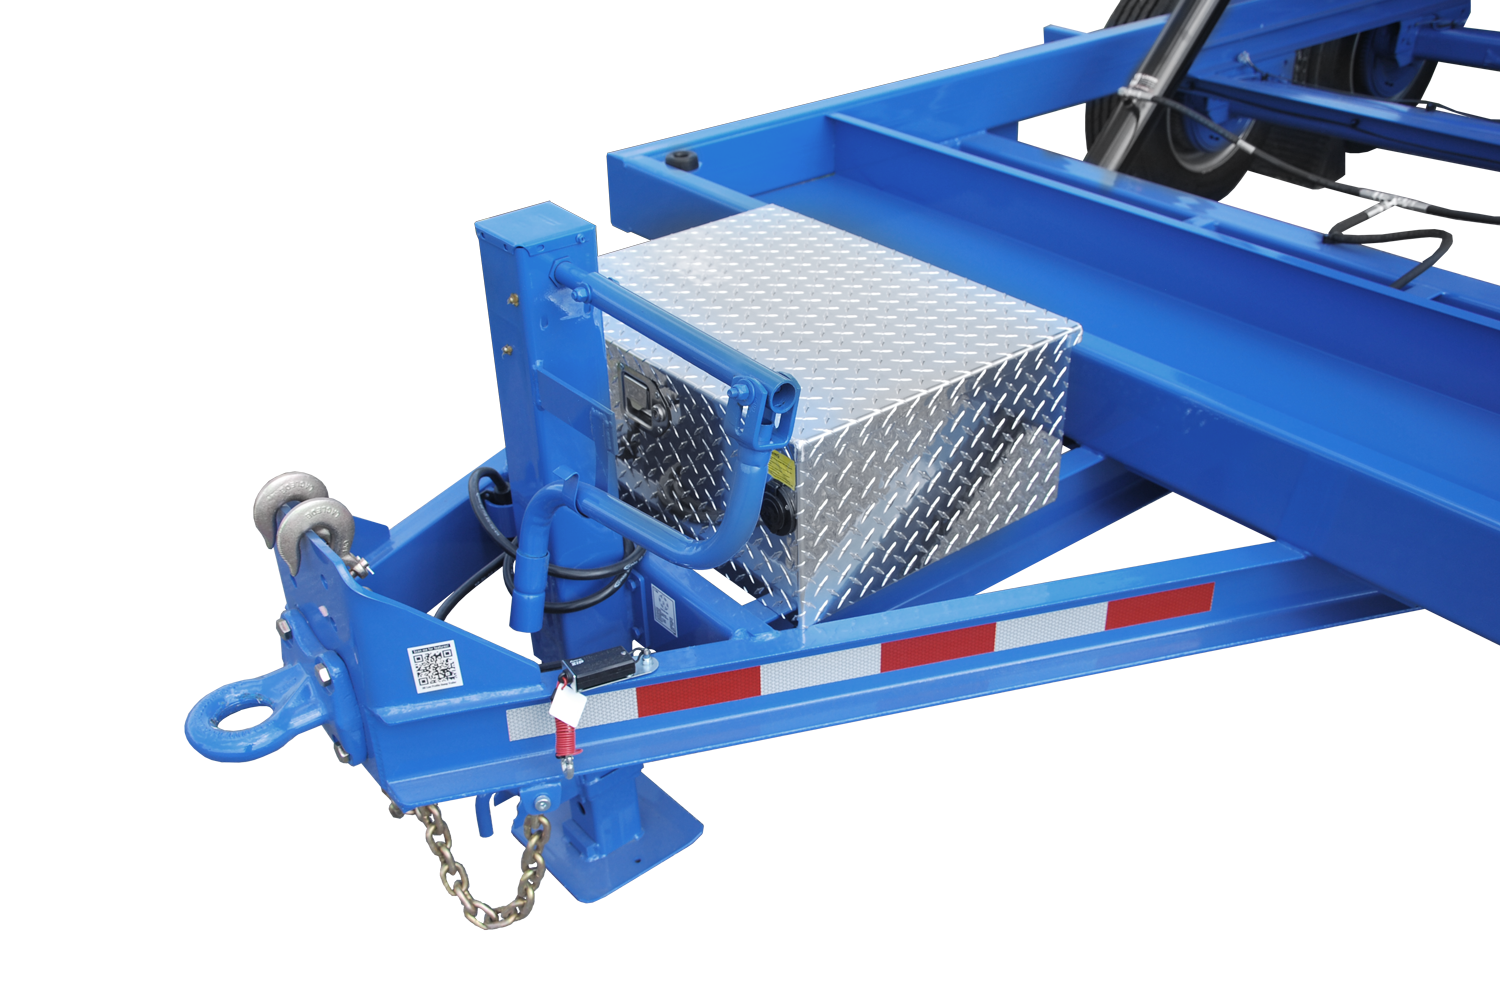 Cam Superline | The BEAST Heavy Duty Low Profile Dump Trailers | Image | Blue The BEAST Heavy Duty Low Profile Dump Trailer with reflective tape, close-up of Tongue